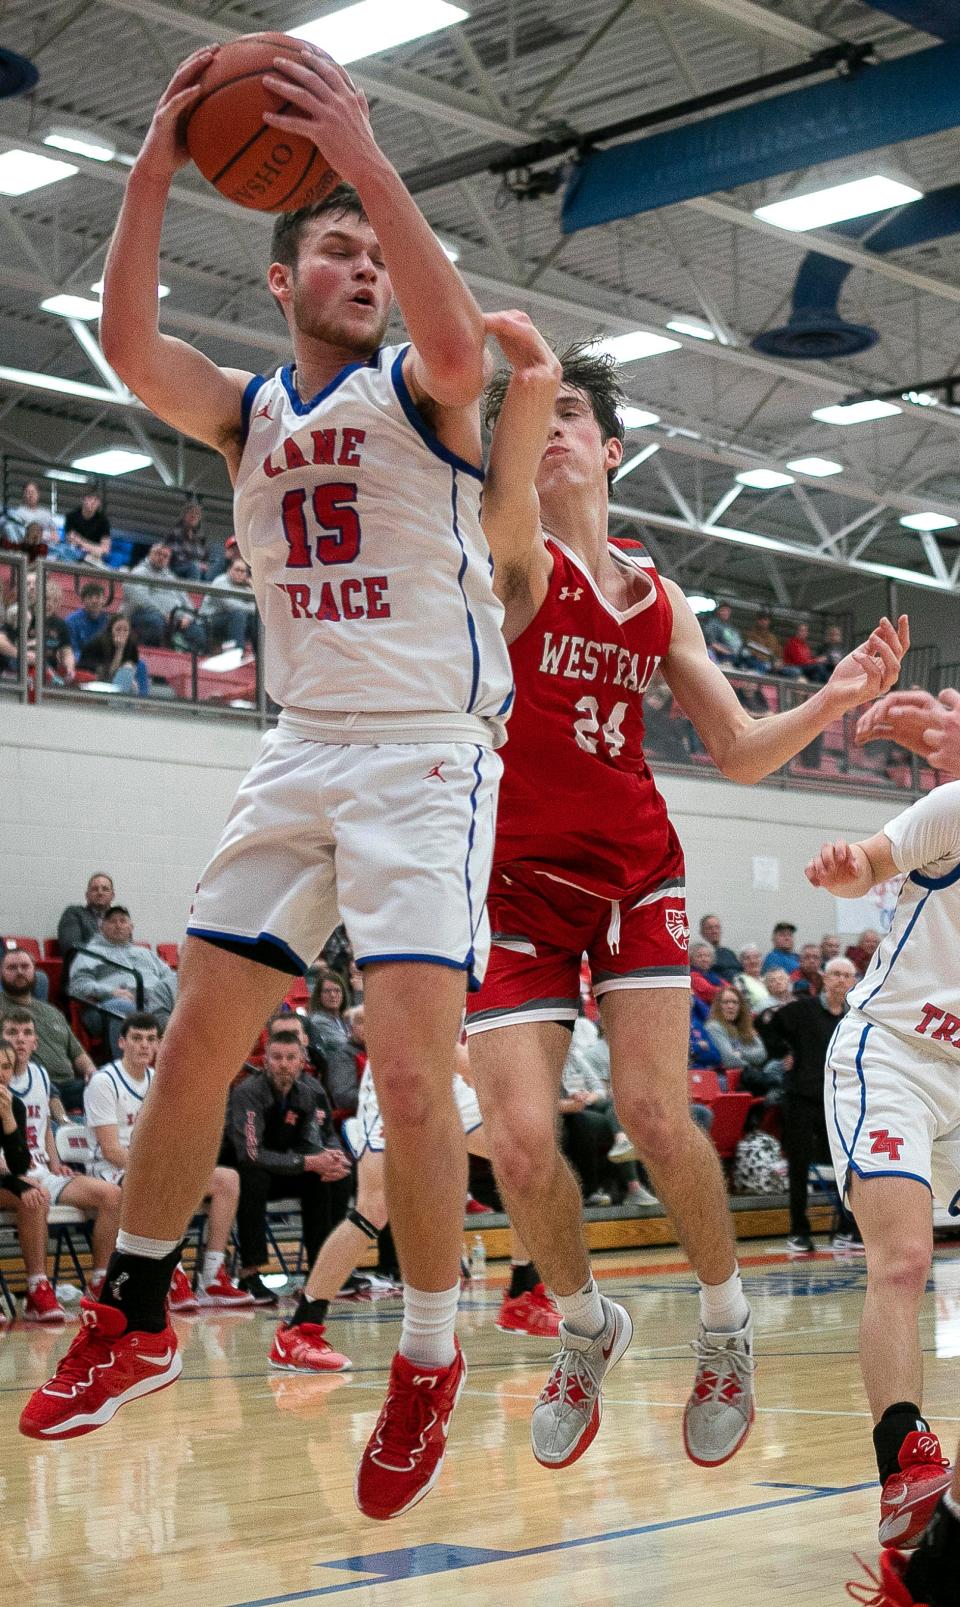 Zane Trace's Landon Robinson (15) comes down with the rebound against Westfall in varsity boys basketball action at Zane Trace High School on Feb. 13, 2024, in Chillicothe, Ohio. Zane Trace defeated Westfall 52-40.